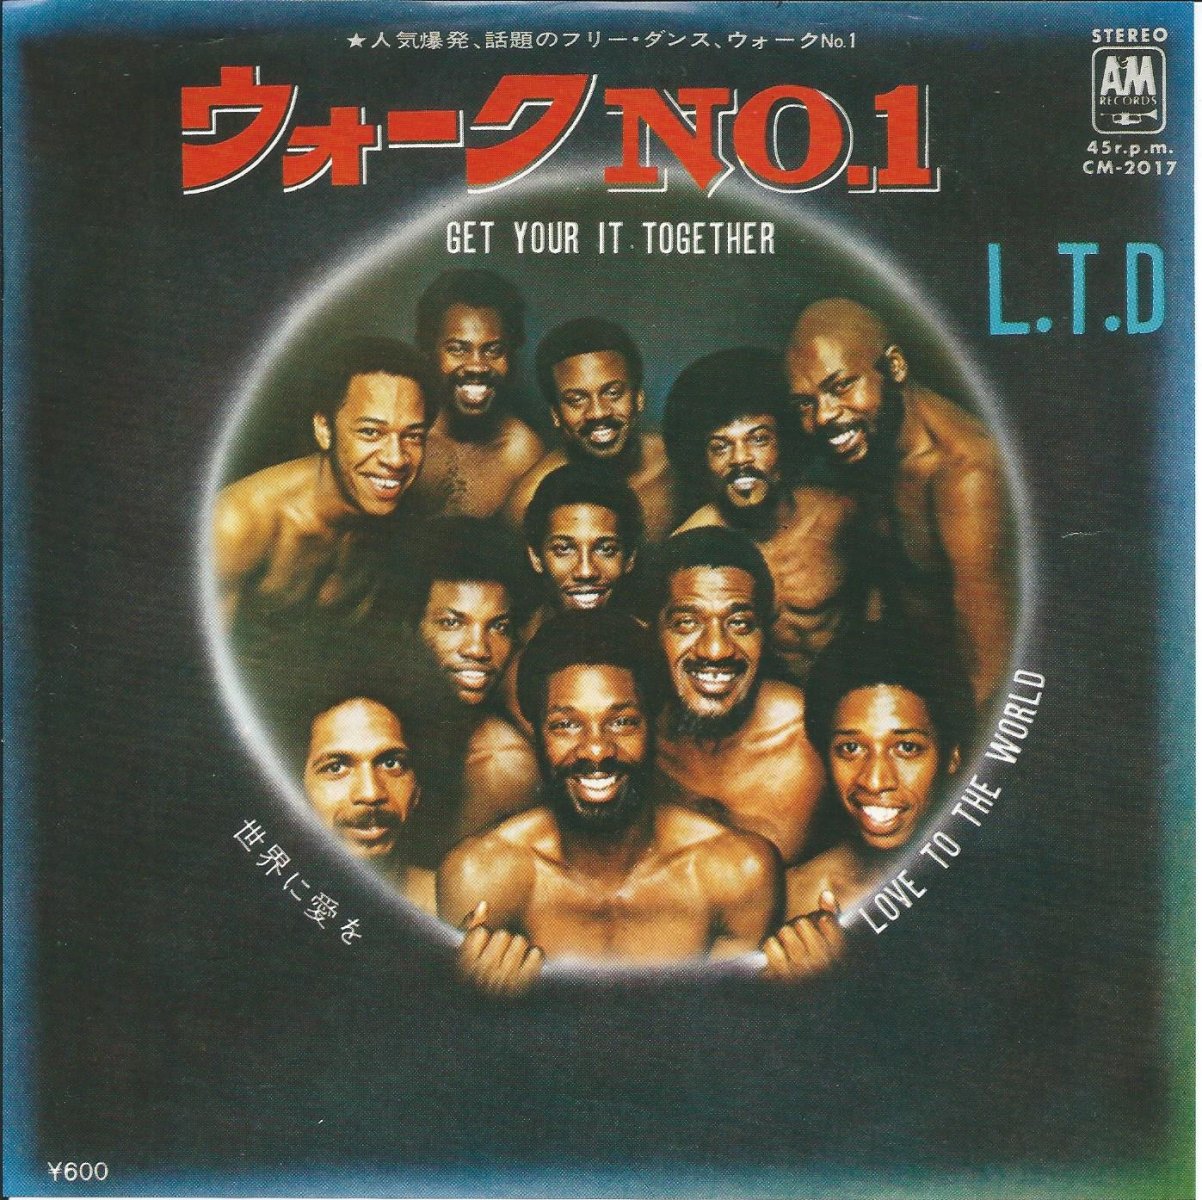 L.T.D. / ウォークNO.1 / GET YOUR IT TOGETHER / 世界に愛を LOVE TO THE WORLD (7